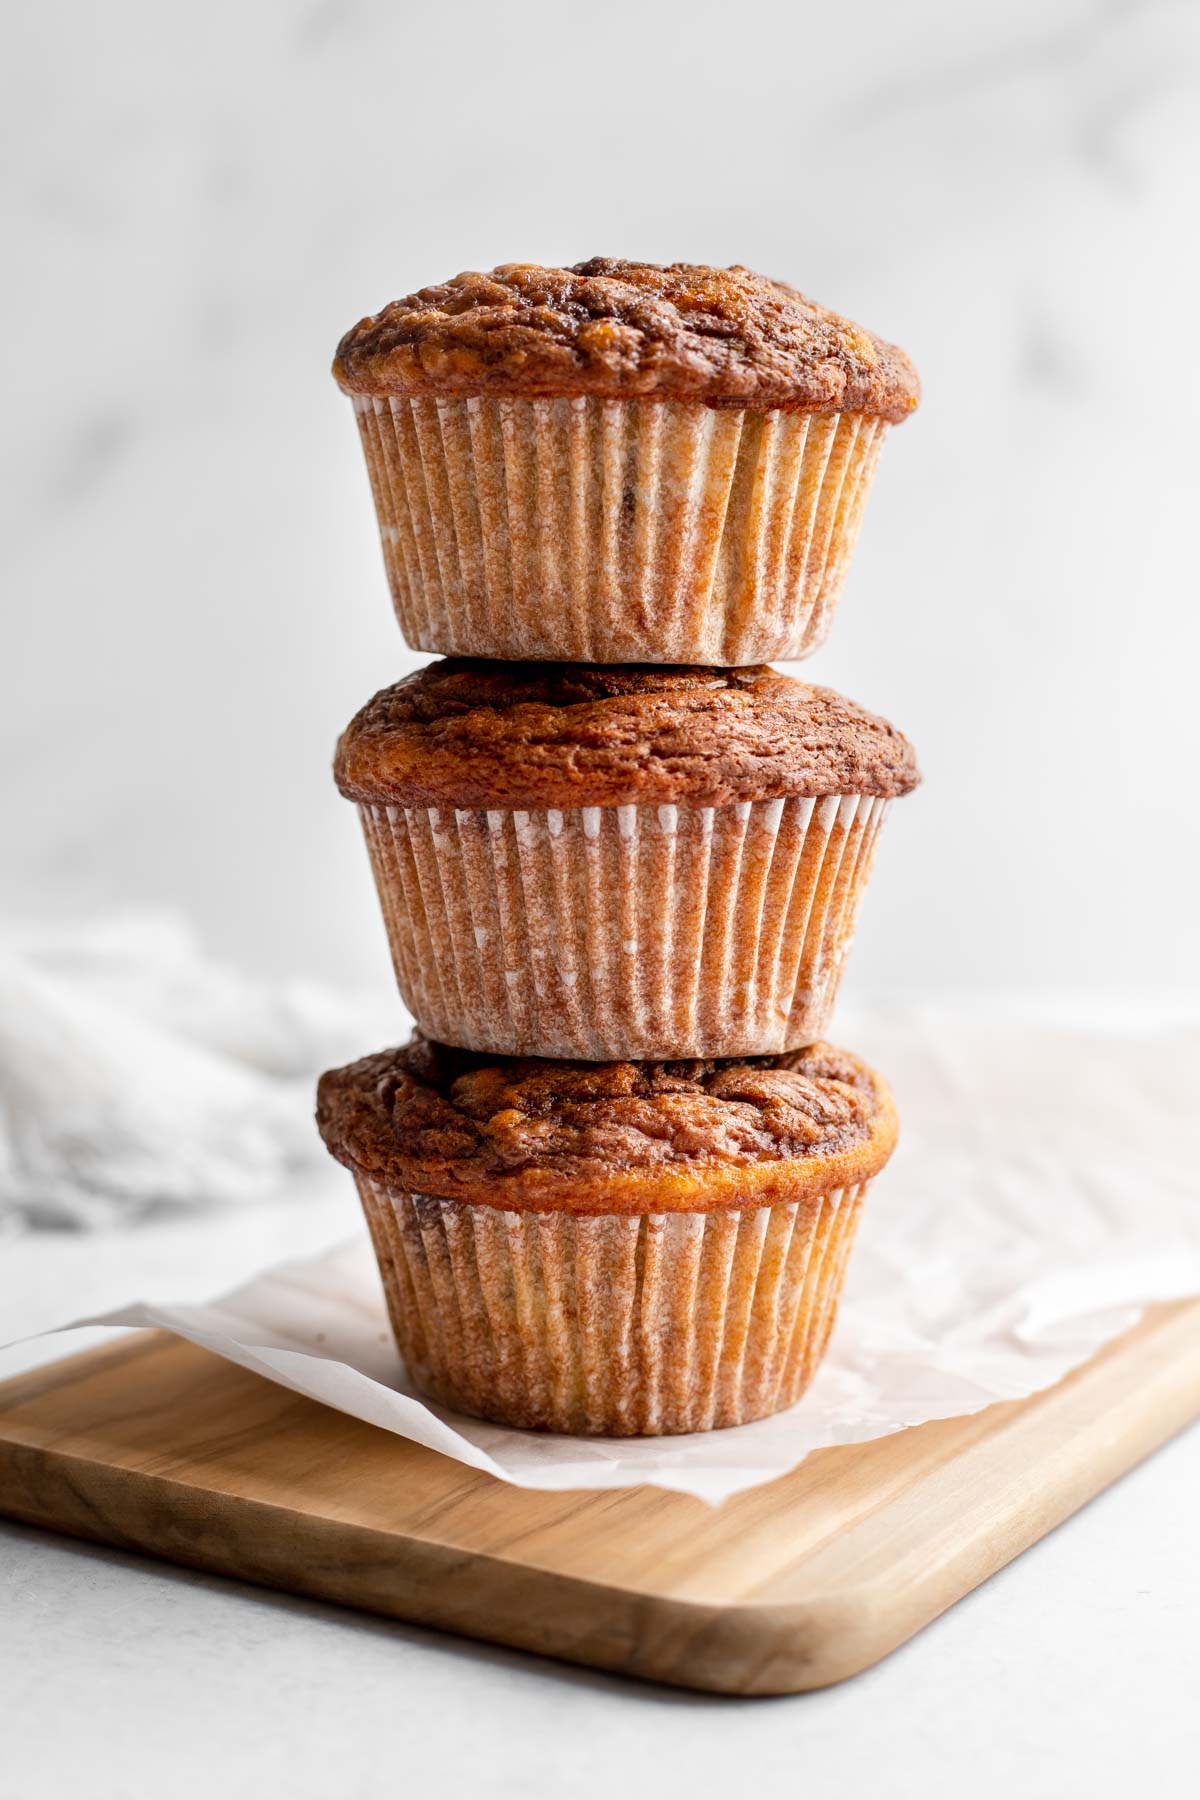 Stack of three banana nutella muffins on a cutting board